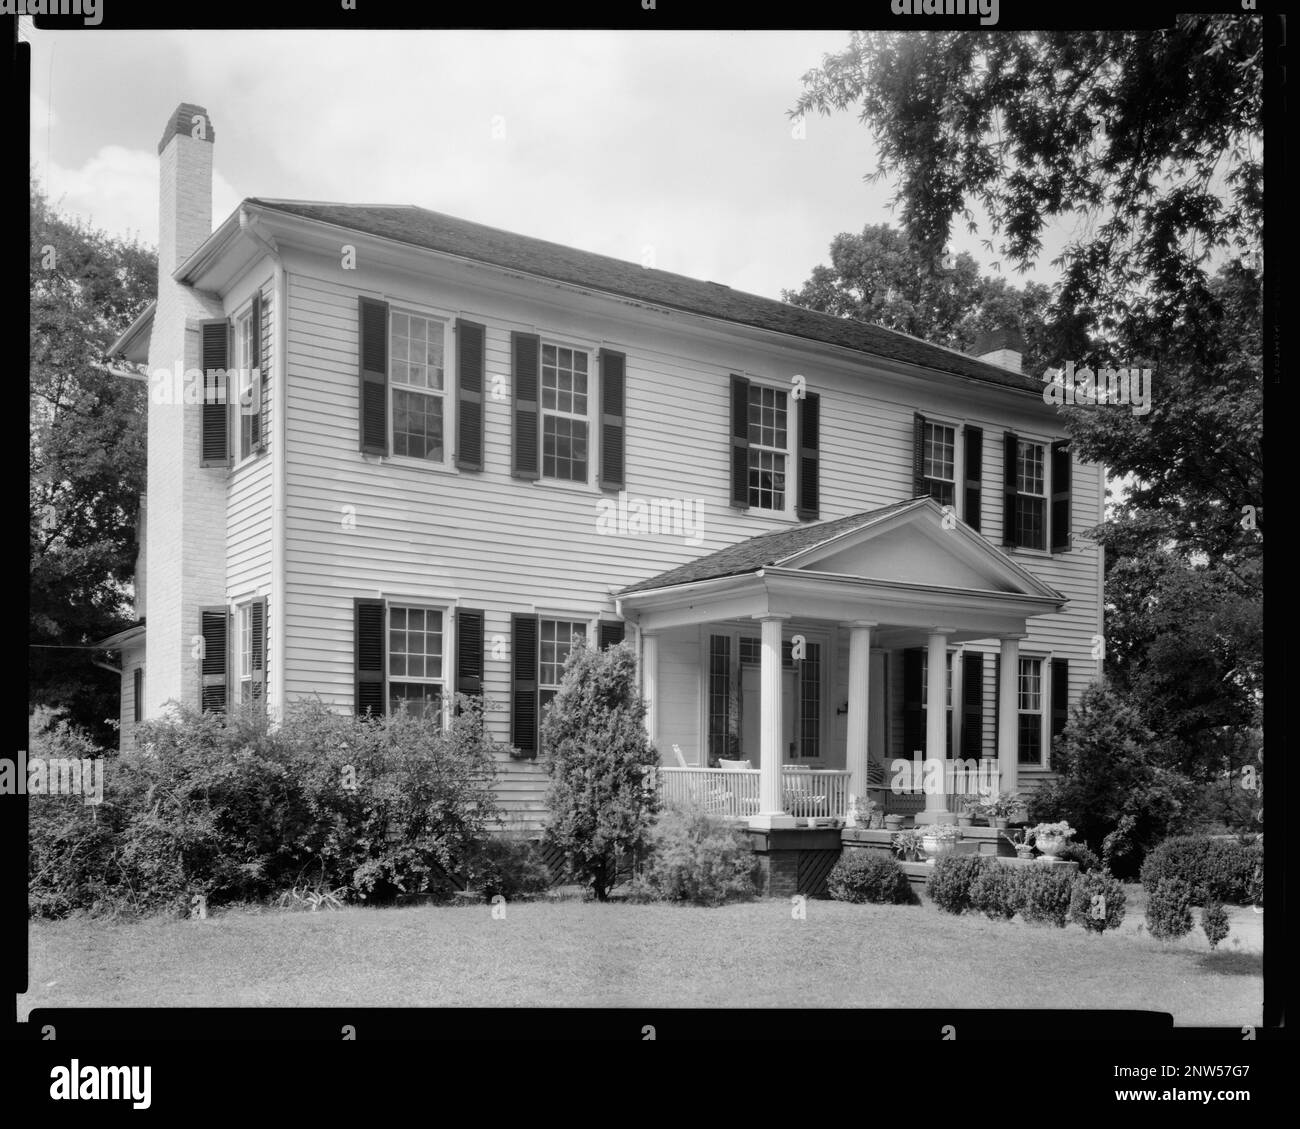 Hilltop, Madison, Morgan County, Georgia. Carnegie Survey of the Architecture of the South. Stati Uniti, Georgia, Morgan County, Madison, Houses, Colonne, Portici, Clapboard. Foto Stock